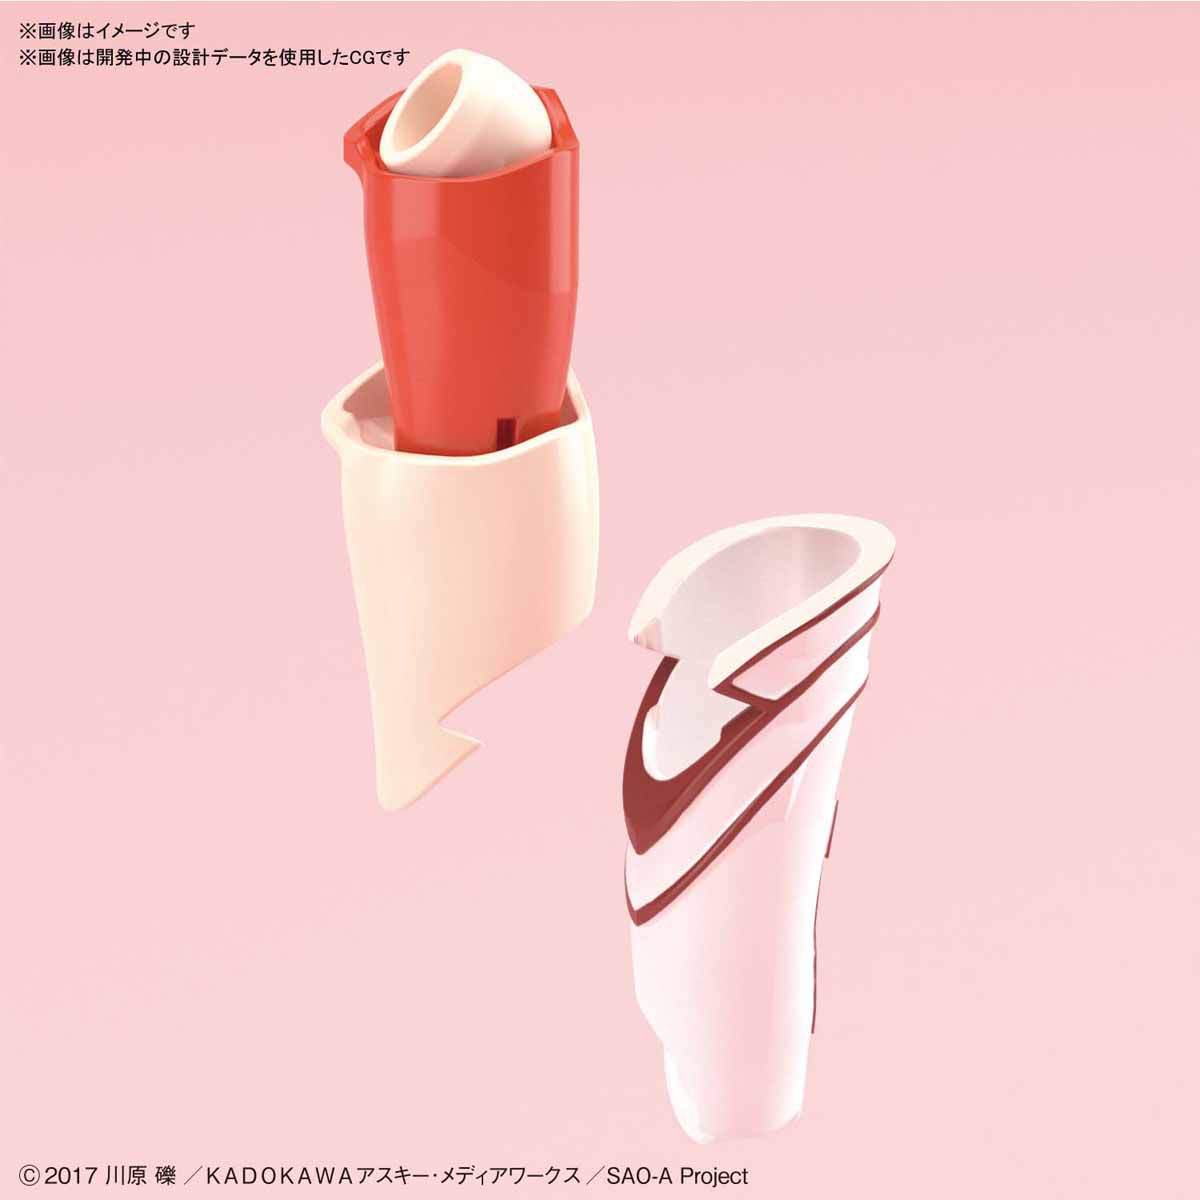 "Sword Art Online" Transformation technology to reproduce the natural redness of the thigh in the plastic model of Asuna 6